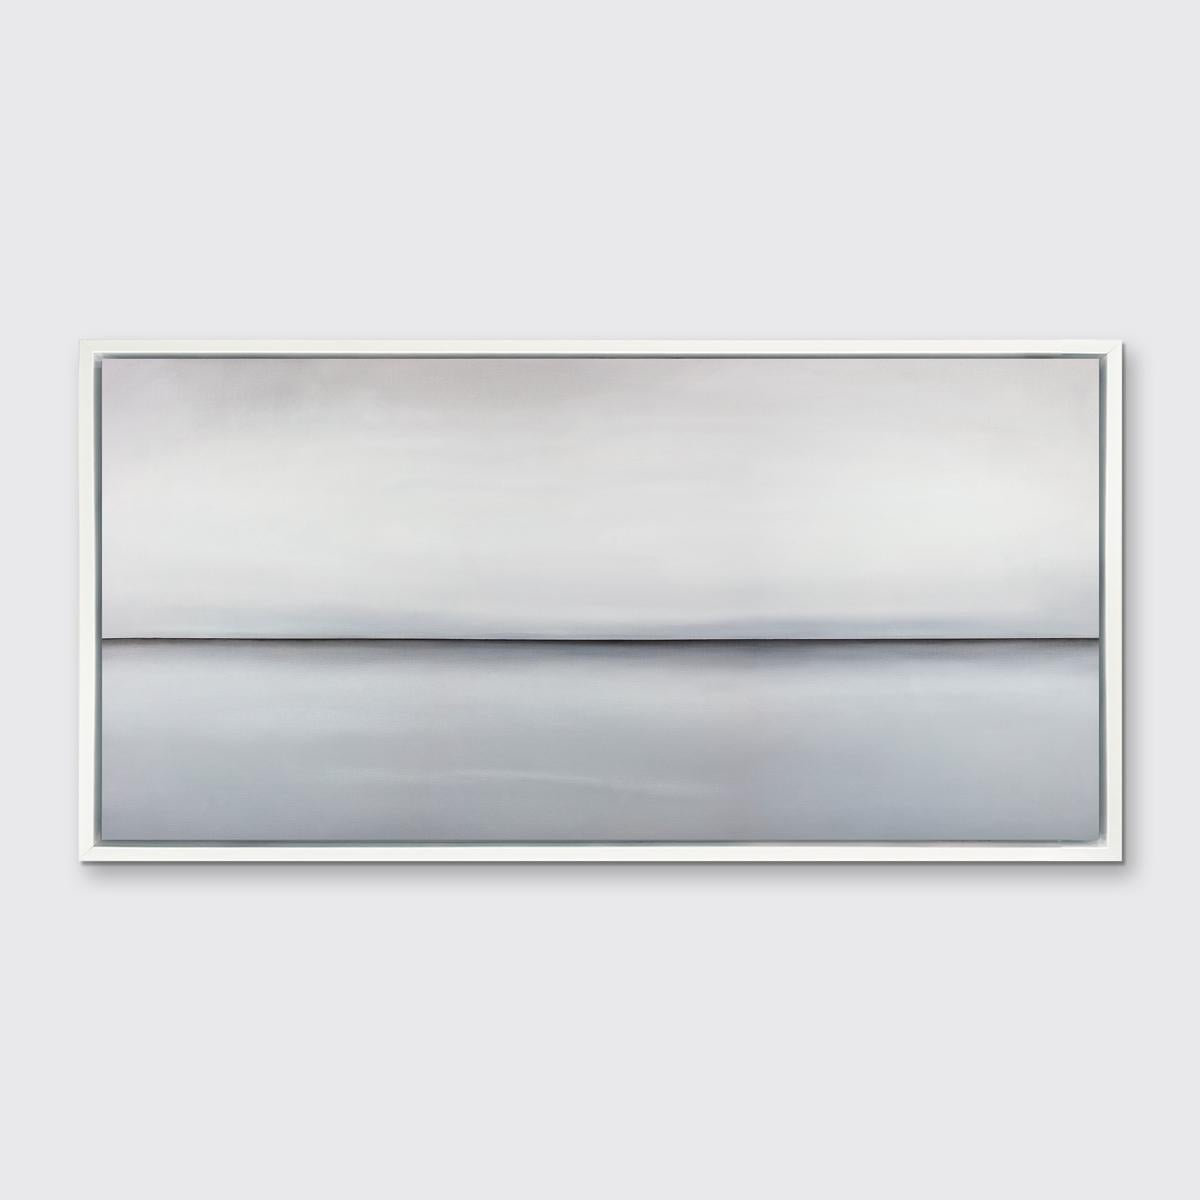 Tony Iadicicco Abstract Print - "Clear View" Framed Limited Edition Giclee Print, 30" x 60"